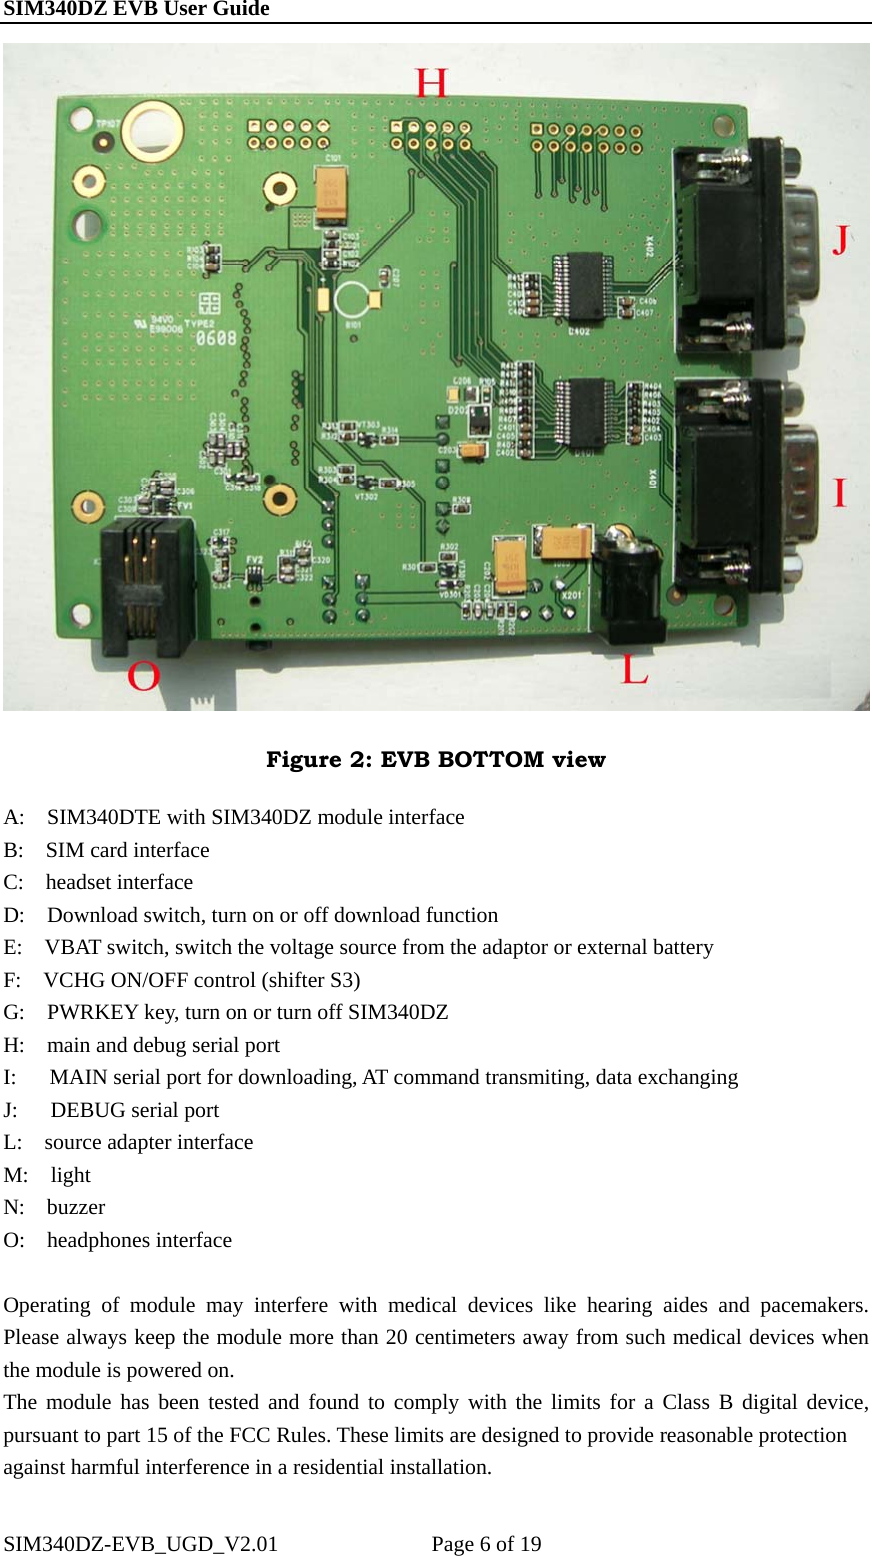 SIM340DZ EVB User Guide                                                        Figure 2: EVB BOTTOM view A:    SIM340DTE with SIM340DZ module interface B:    SIM card interface C:  headset interface D:    Download switch, turn on or off download function E:    VBAT switch, switch the voltage source from the adaptor or external battery F:    VCHG ON/OFF control (shifter S3) G:    PWRKEY key, turn on or turn off SIM340DZ H:    main and debug serial port I:      MAIN serial port for downloading, AT command transmiting, data exchanging J:   DEBUG serial port L:  source adapter interface M:  light N:  buzzer O:  headphones interface  Operating of module may interfere with medical devices like hearing aides and pacemakers. Please always keep the module more than 20 centimeters away from such medical devices when the module is powered on. The module has been tested and found to comply with the limits for a Class B digital device, pursuant to part 15 of the FCC Rules. These limits are designed to provide reasonable protection   against harmful interference in a residential installation. SIM340DZ-EVB_UGD_V2.01              Page 6 of 19 